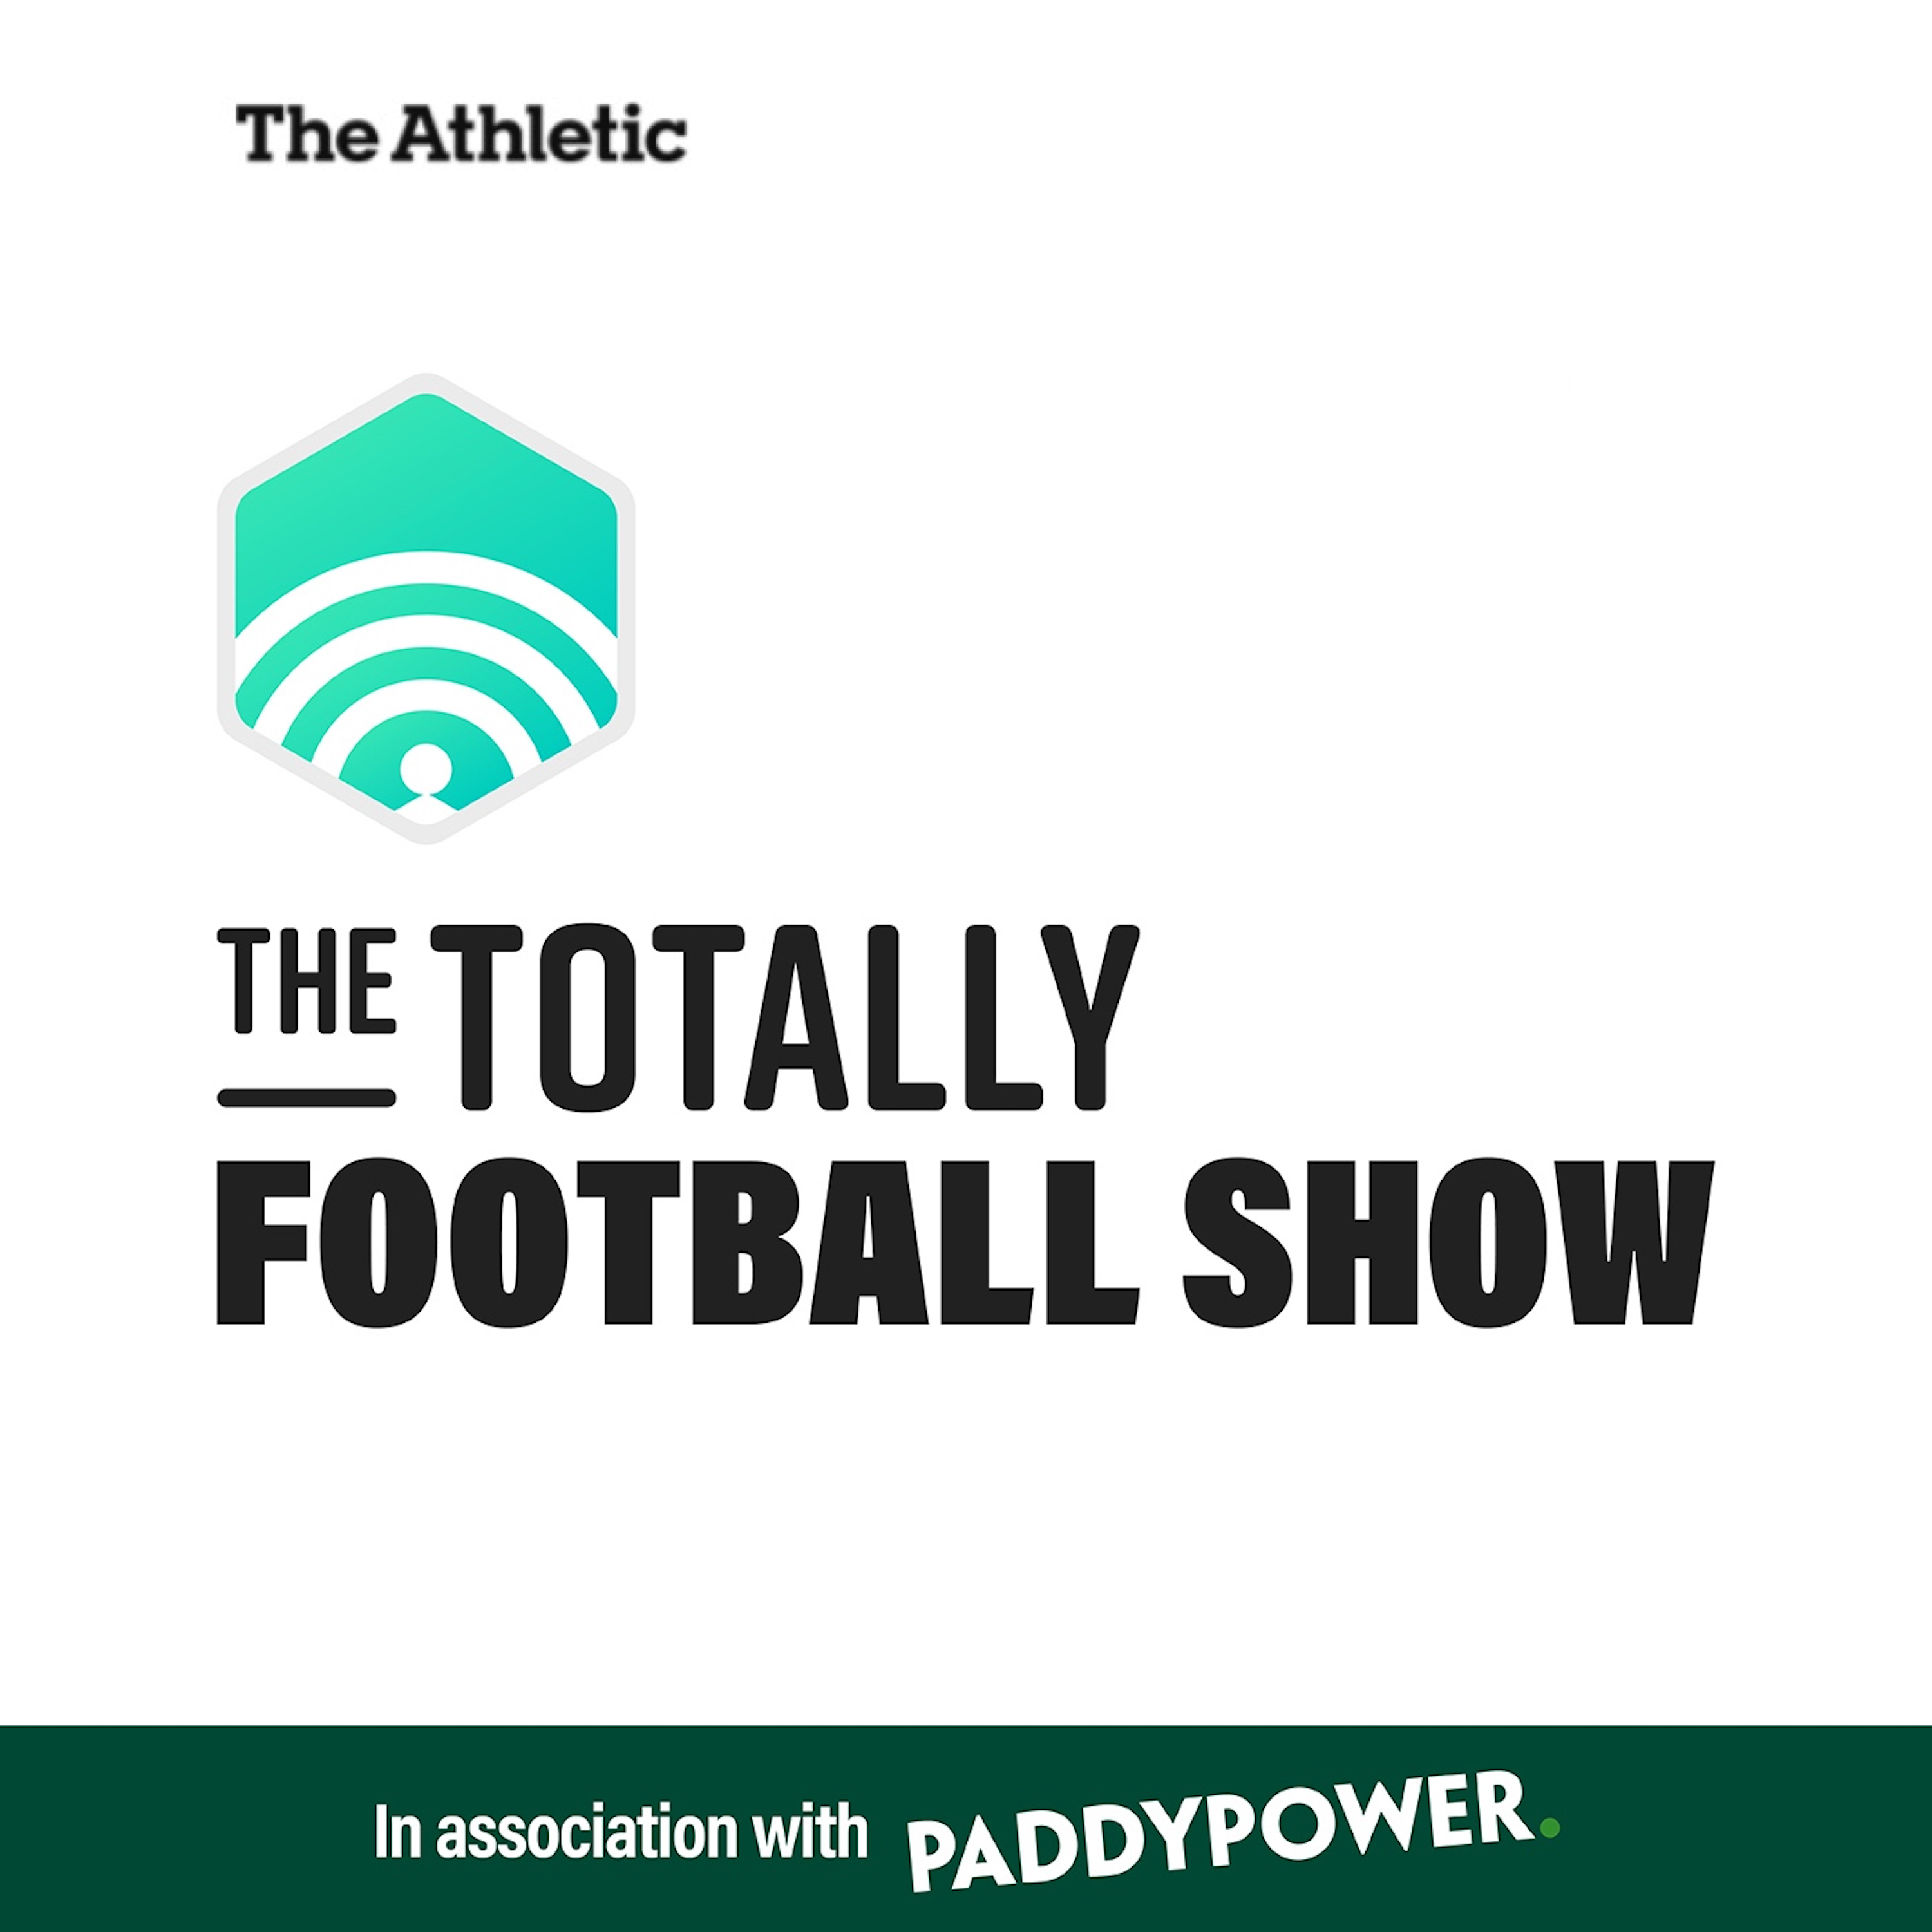 The Totally Football Show image